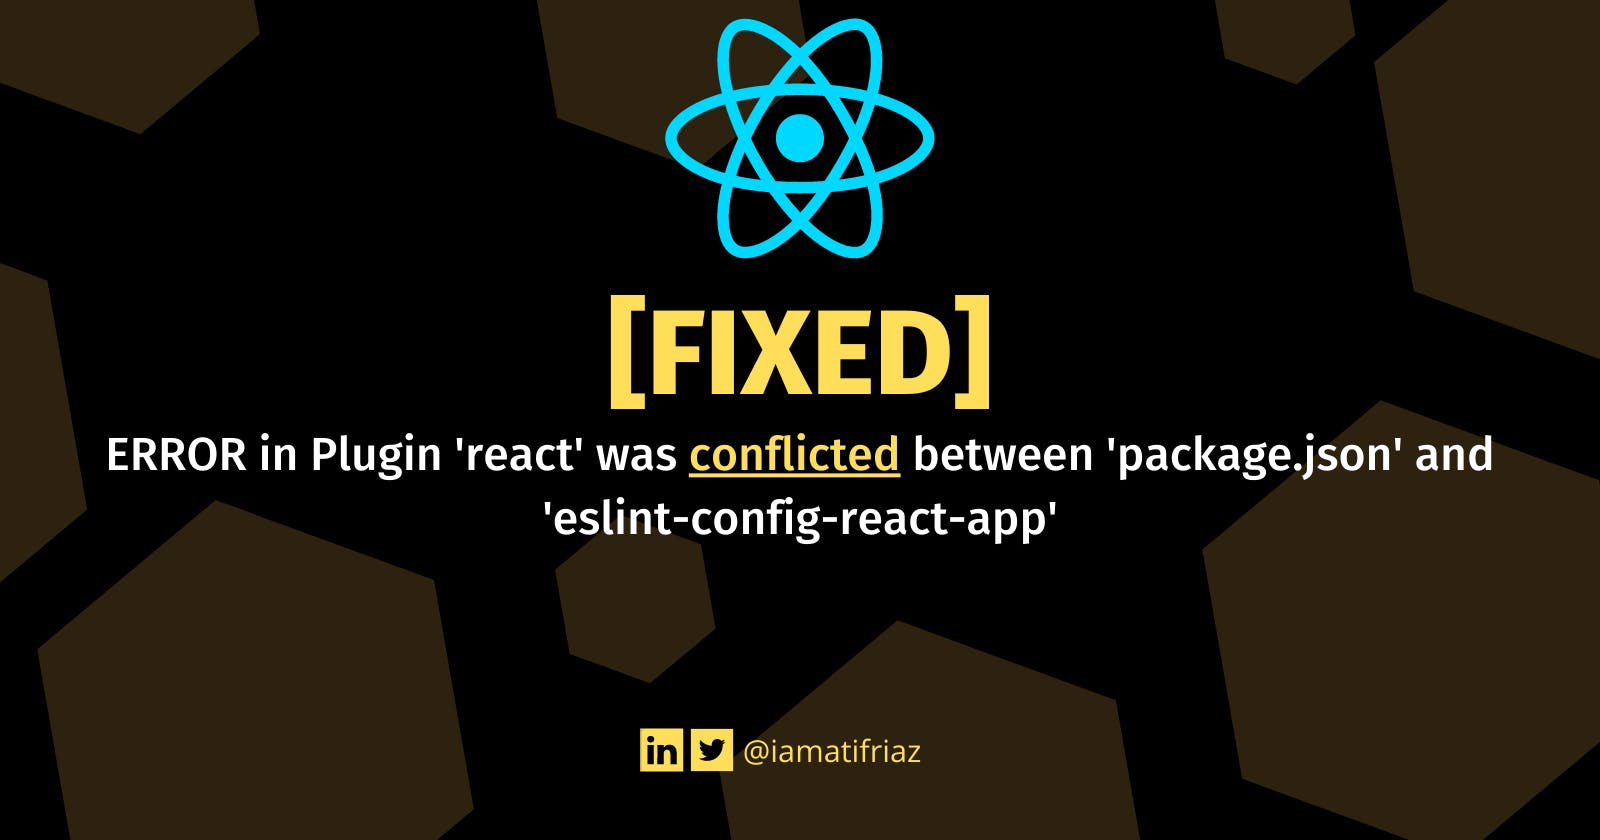 How to Fix ERROR in Plugin 'react' was conflicted between 'package.json' and 'eslint-config-react-app'?